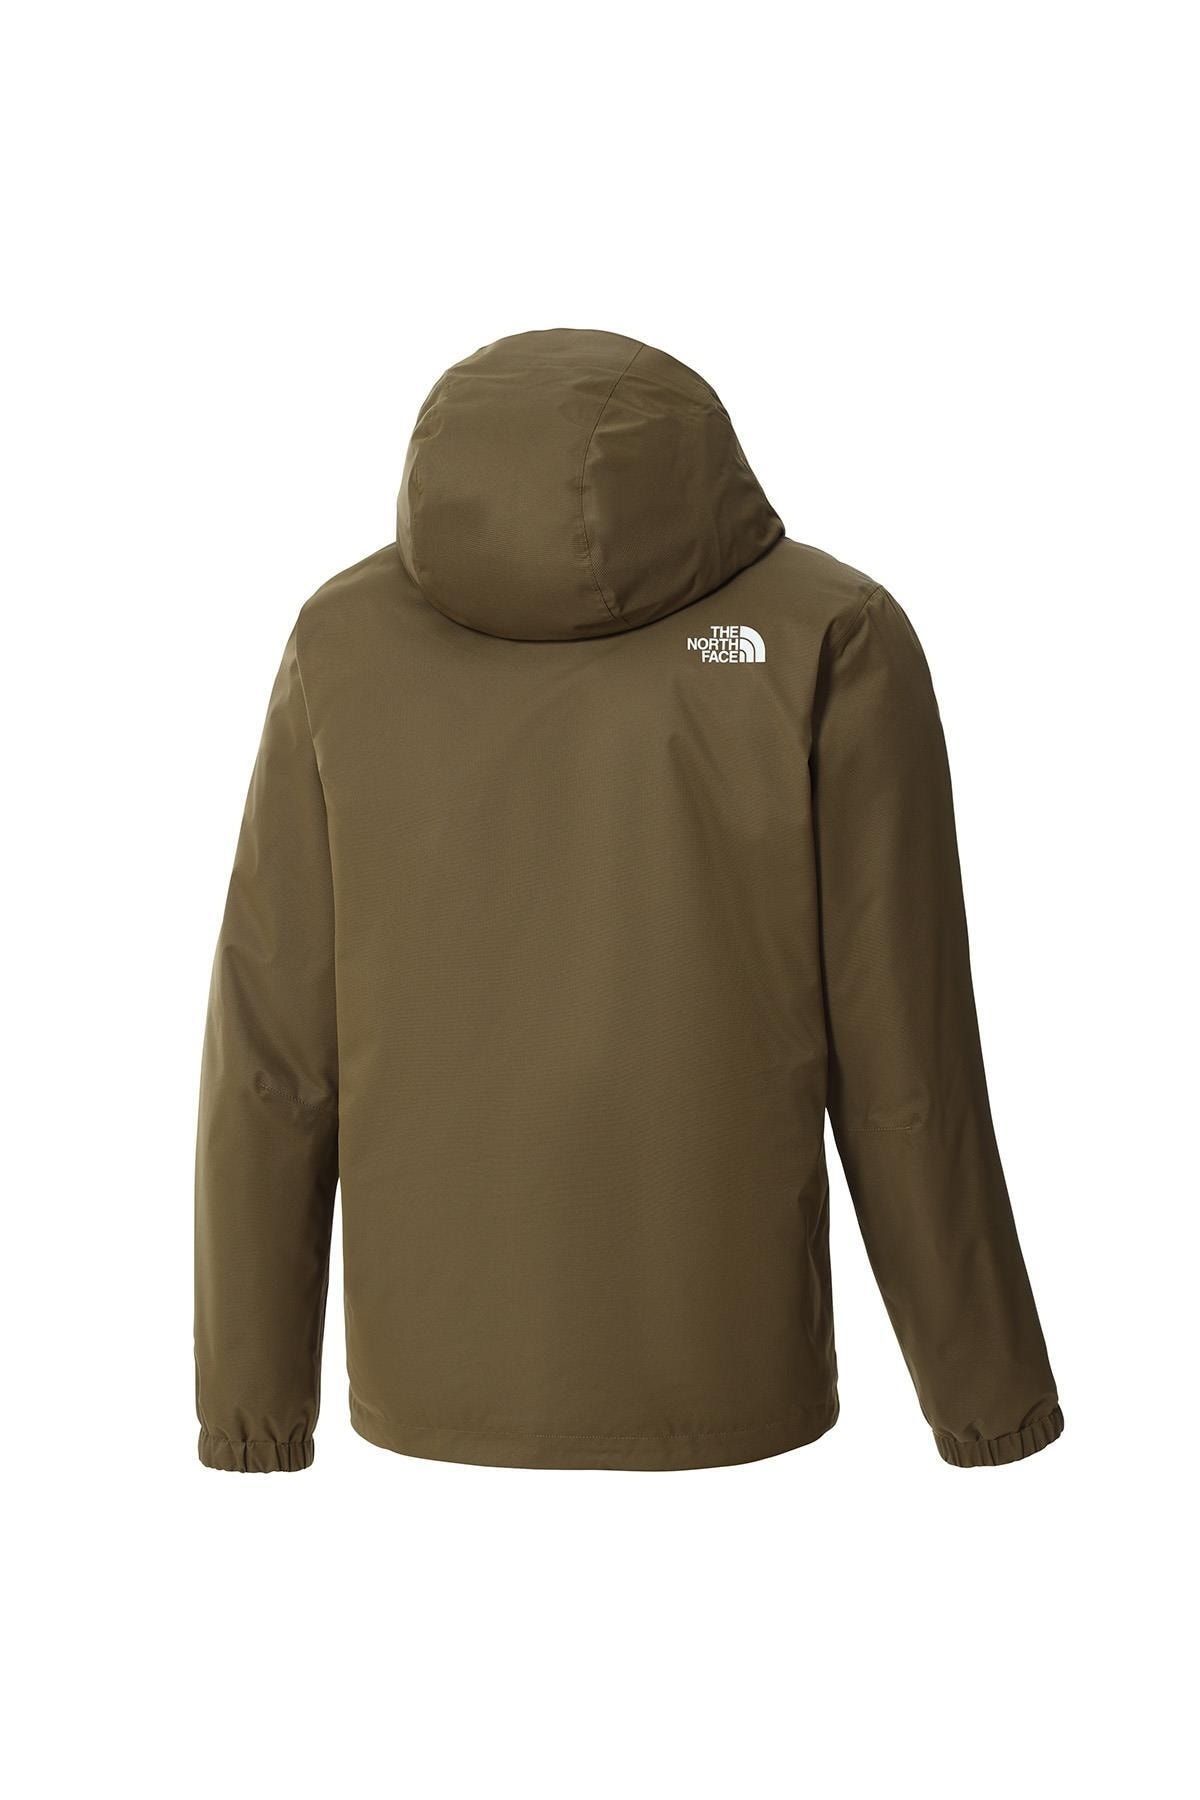 The North Face The Northface Erkek Quest Insulated Jacket Ceket